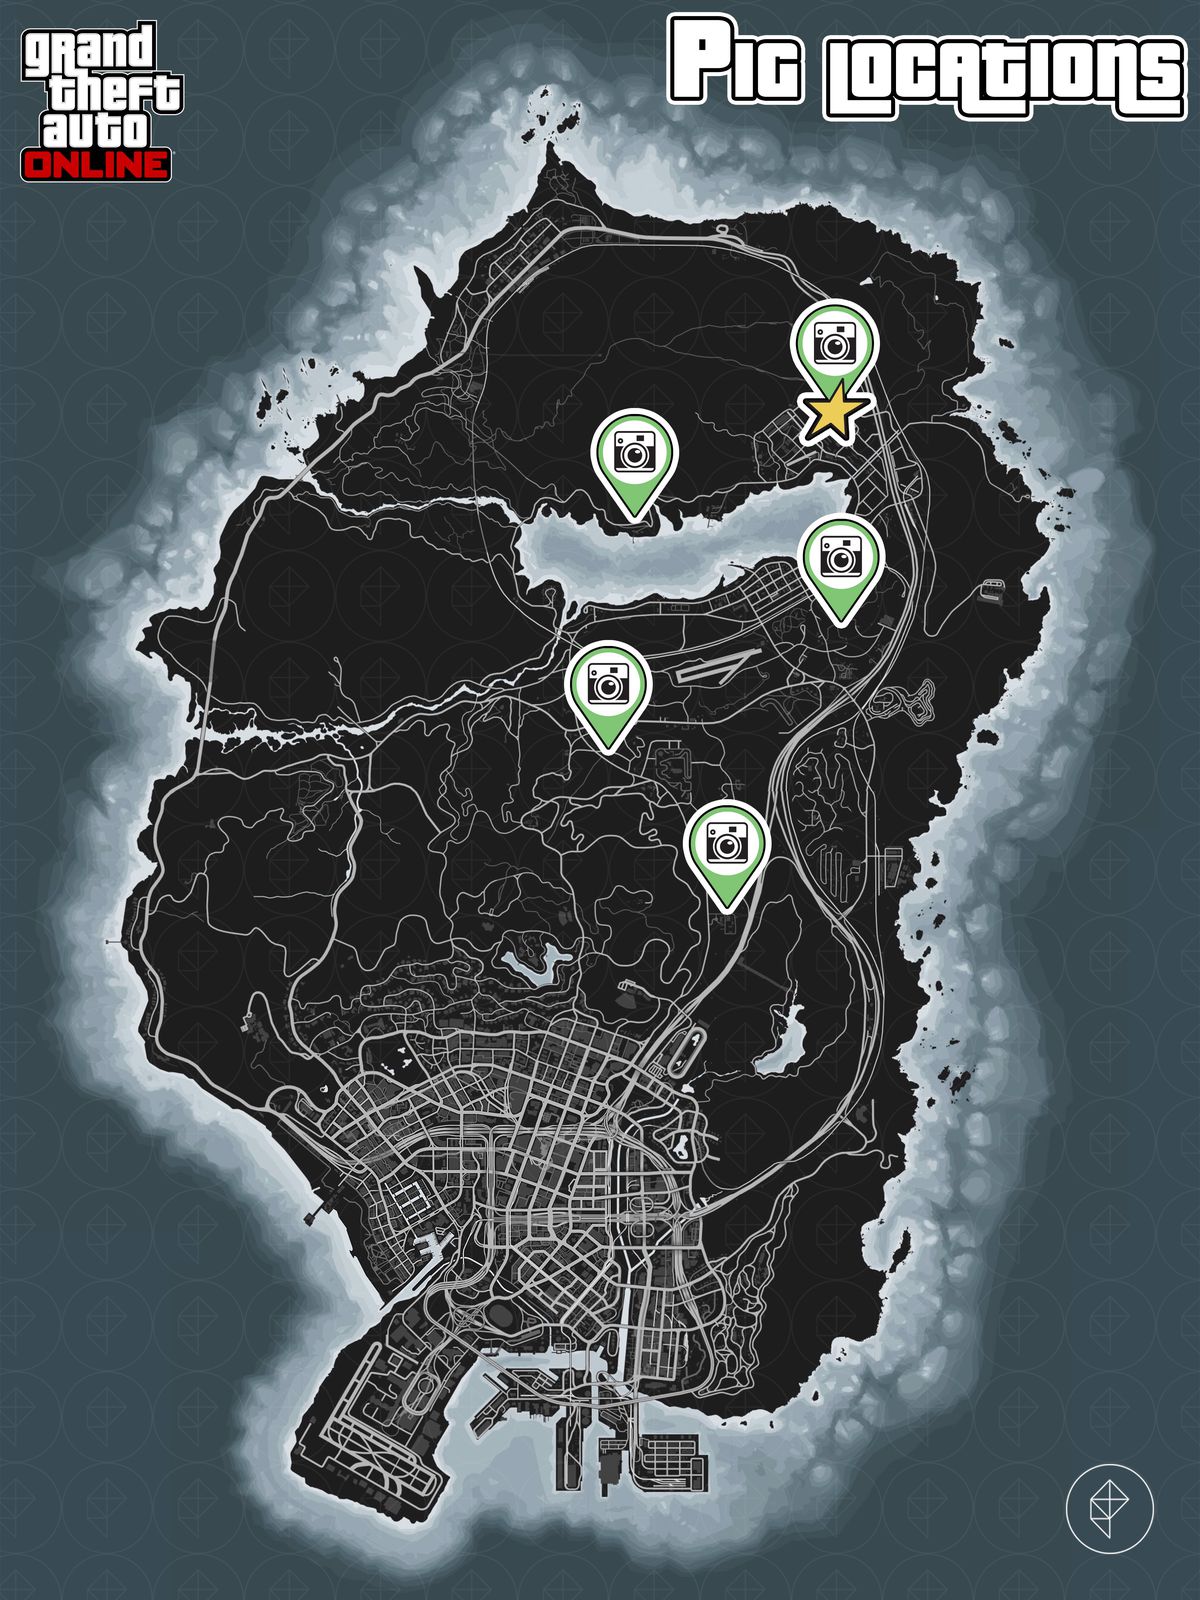 GTA Online map showing pig locations